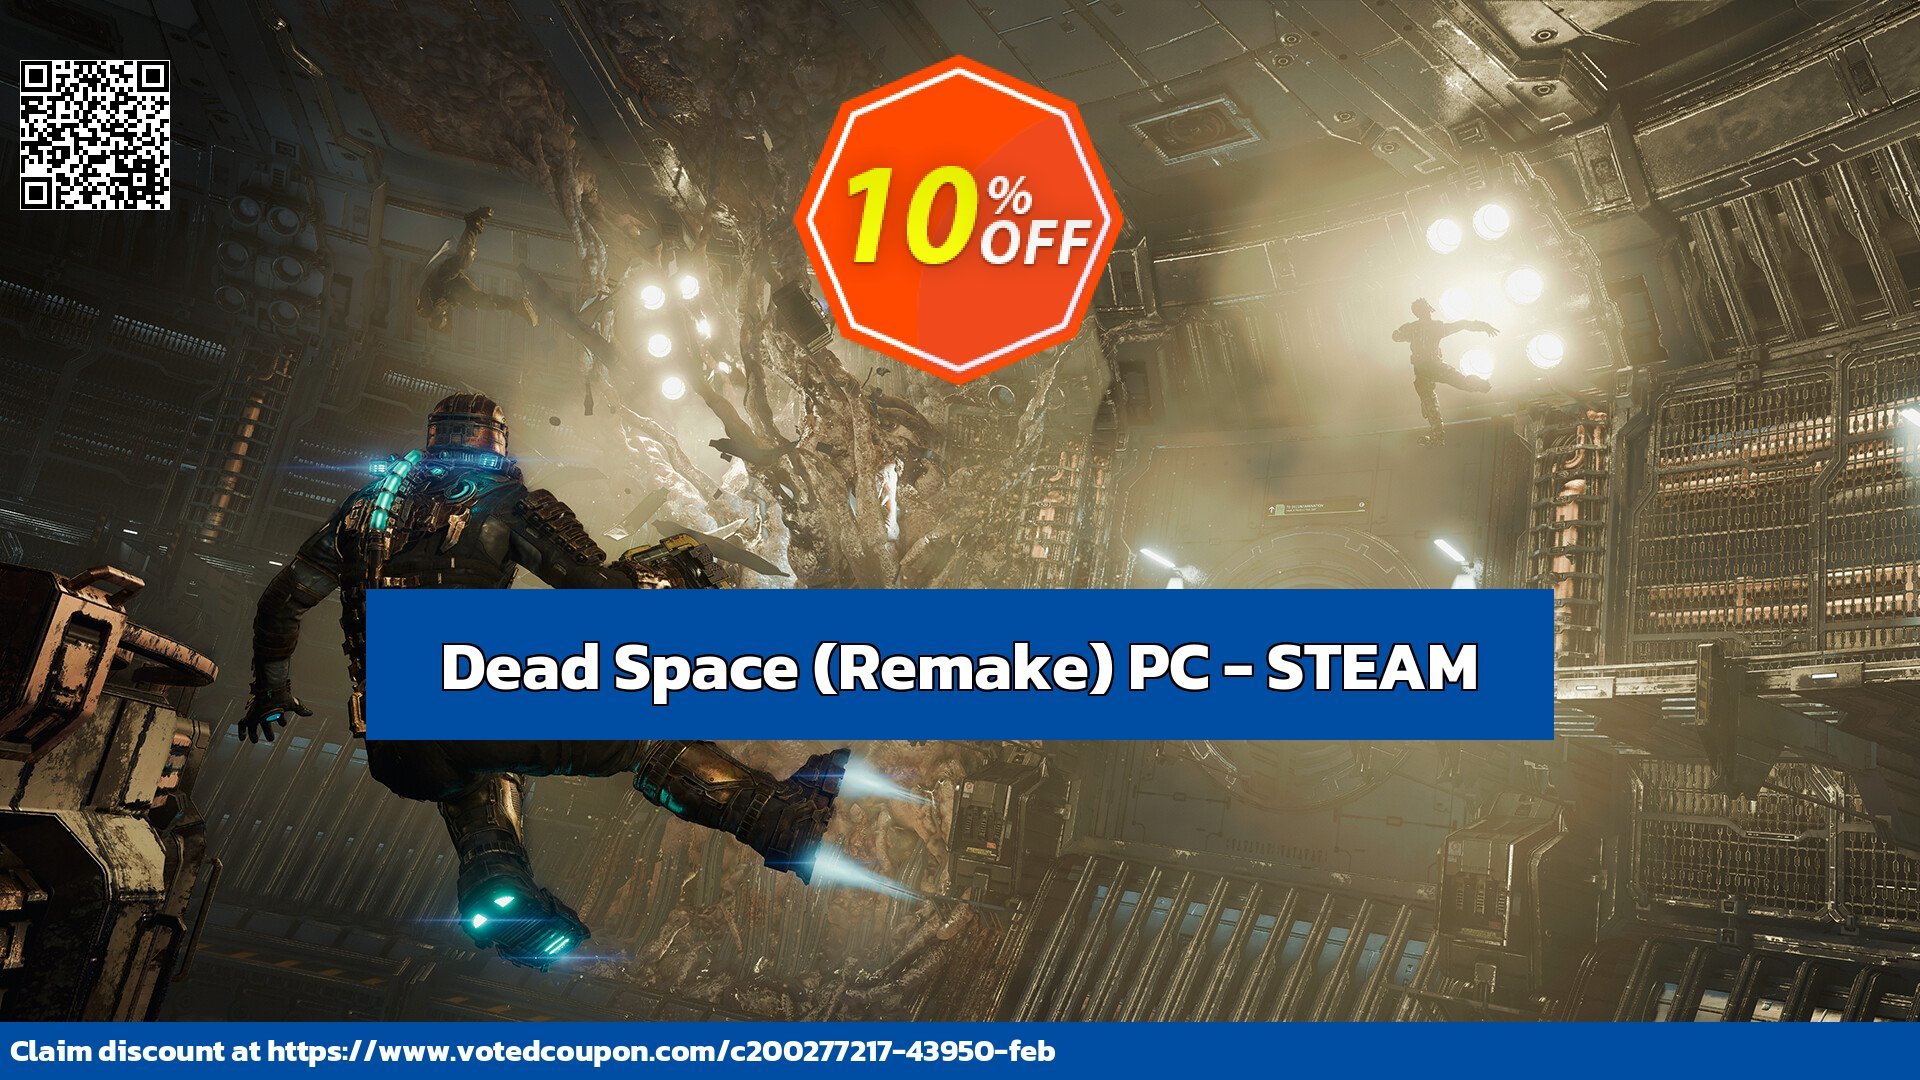 Dead Space, Remake PC - STEAM Coupon Code May 2024, 10% OFF - VotedCoupon